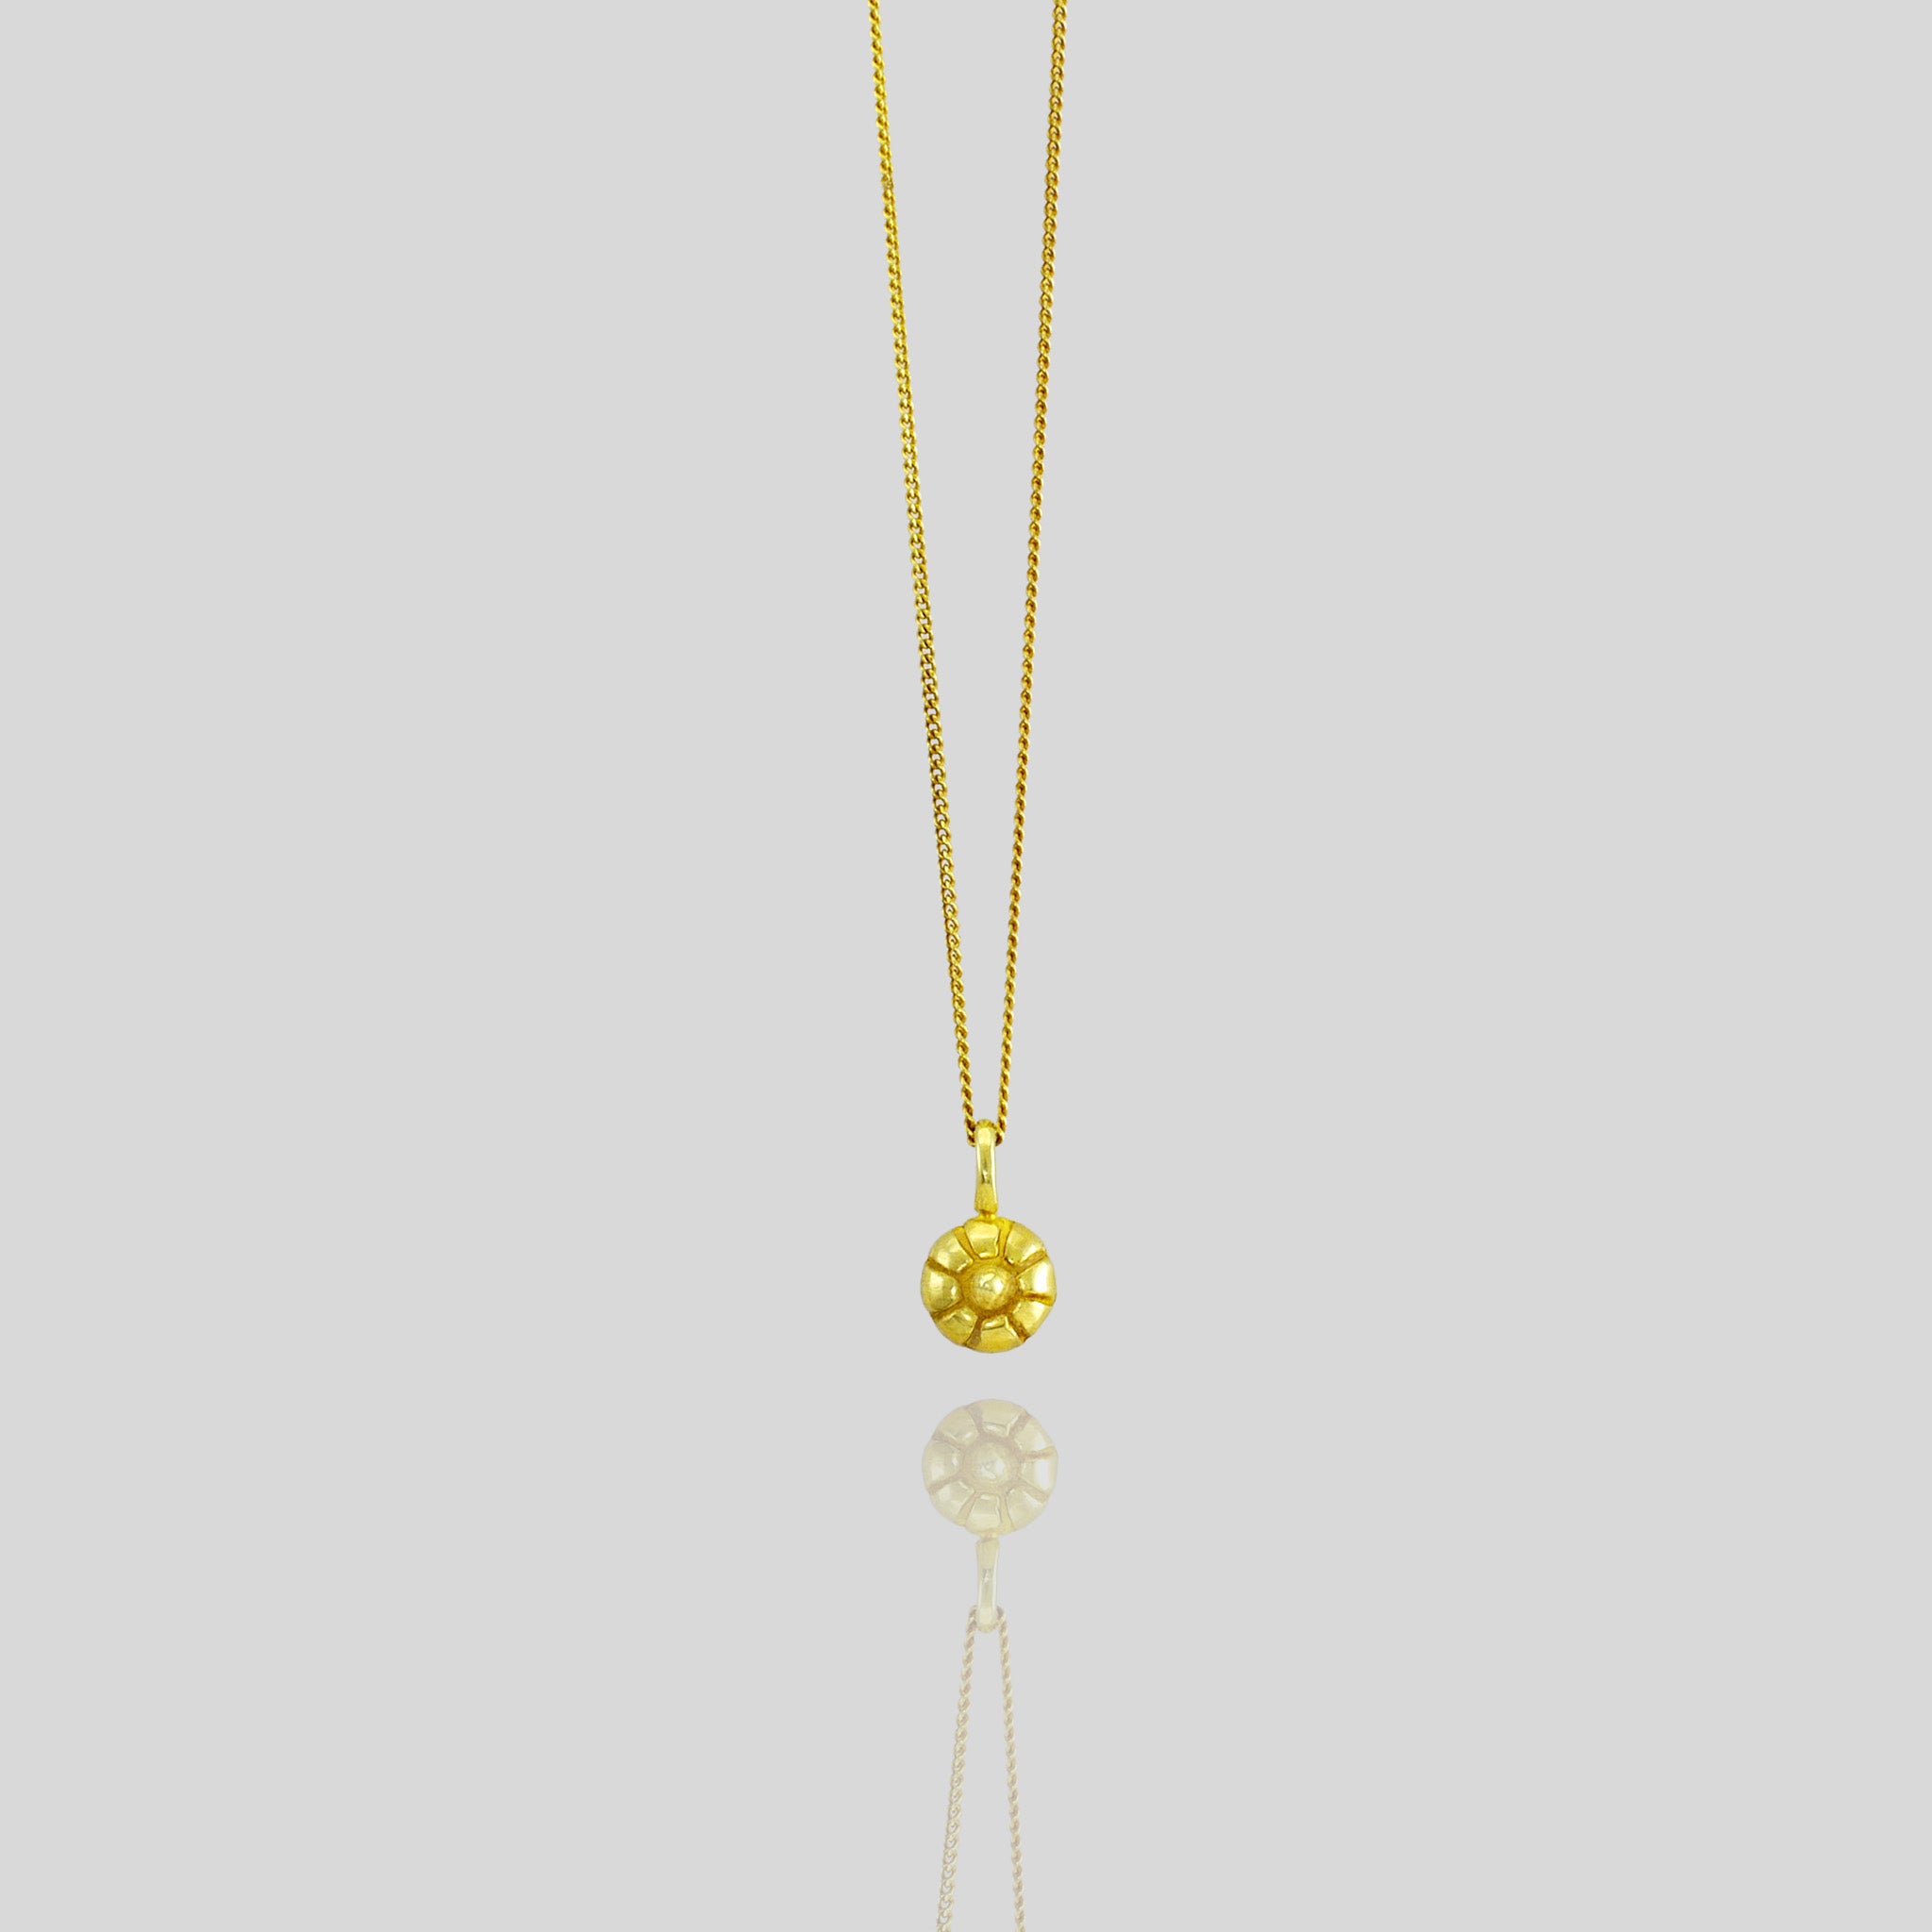 Pendant crafted to resemble the Mallow fruit, made from luxurious gold, capturing its delicate and luminous natural form.